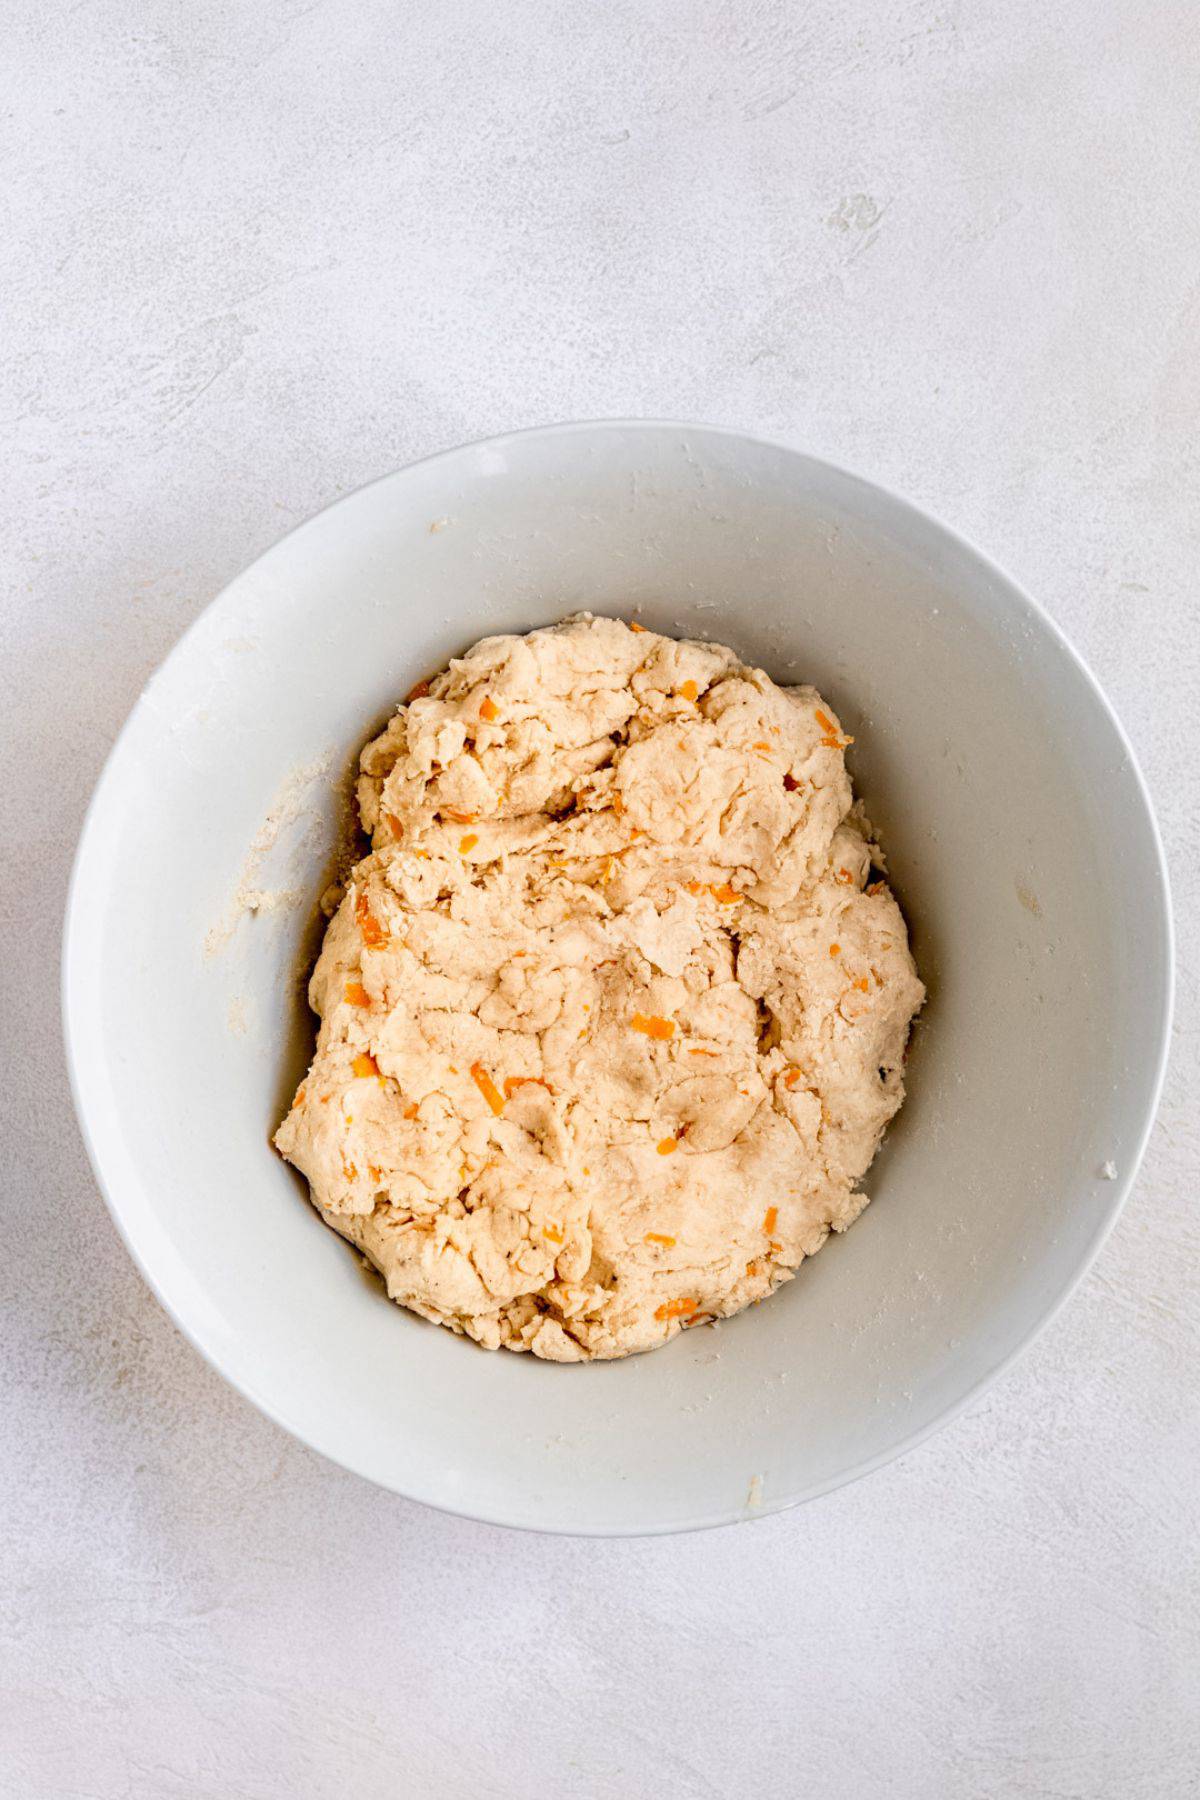 Cheese scone dough in a mixing bowl.